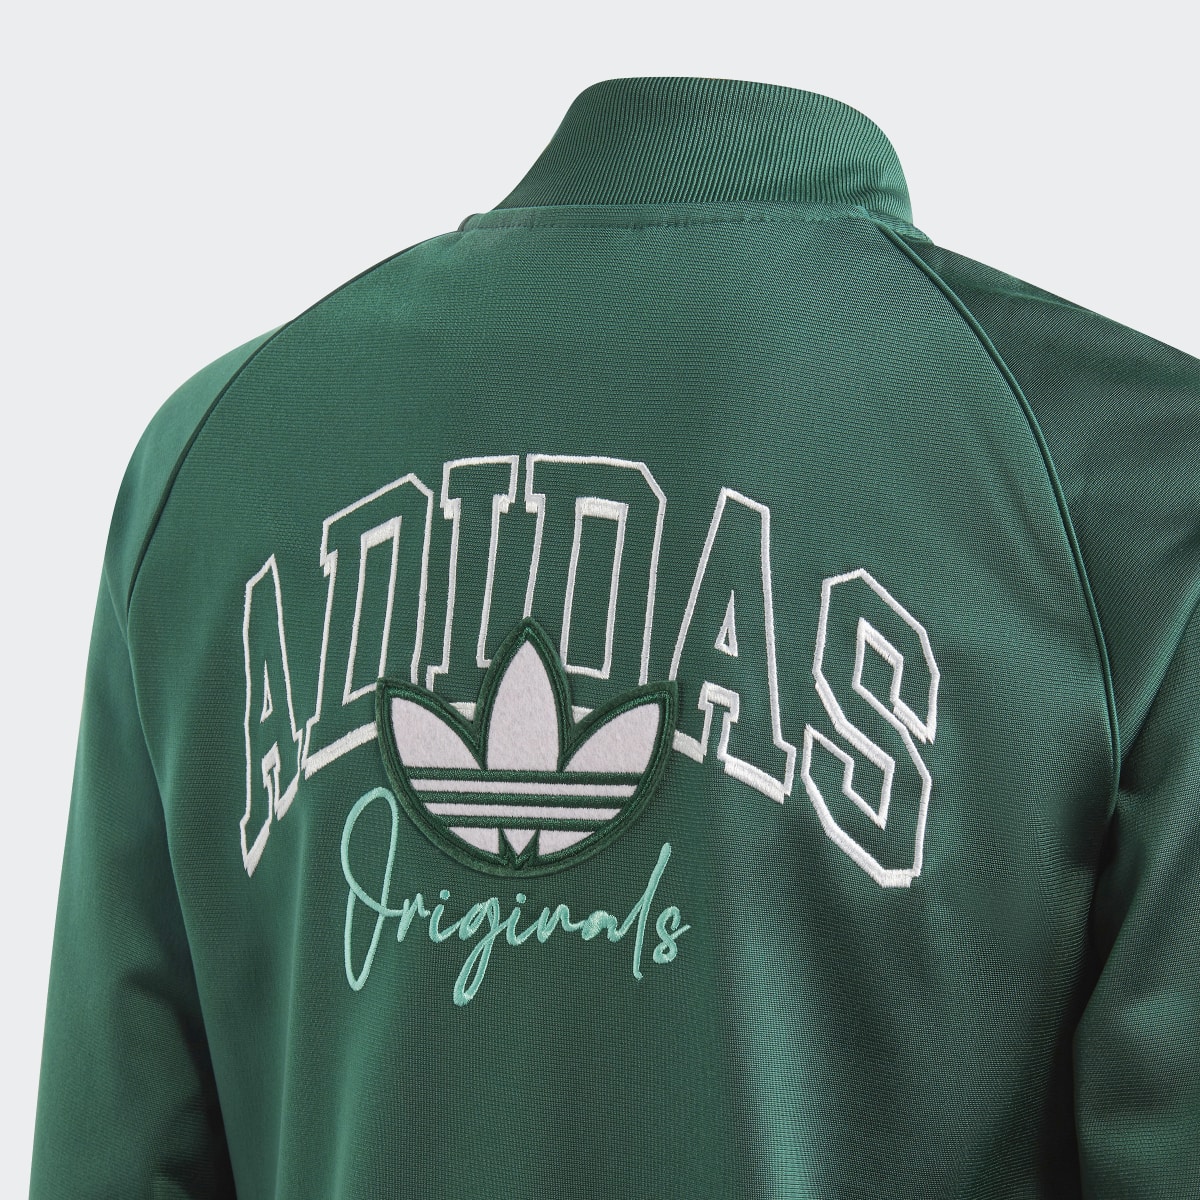 Adidas Collegiate Graphic Pack SST Track Jacket. 5